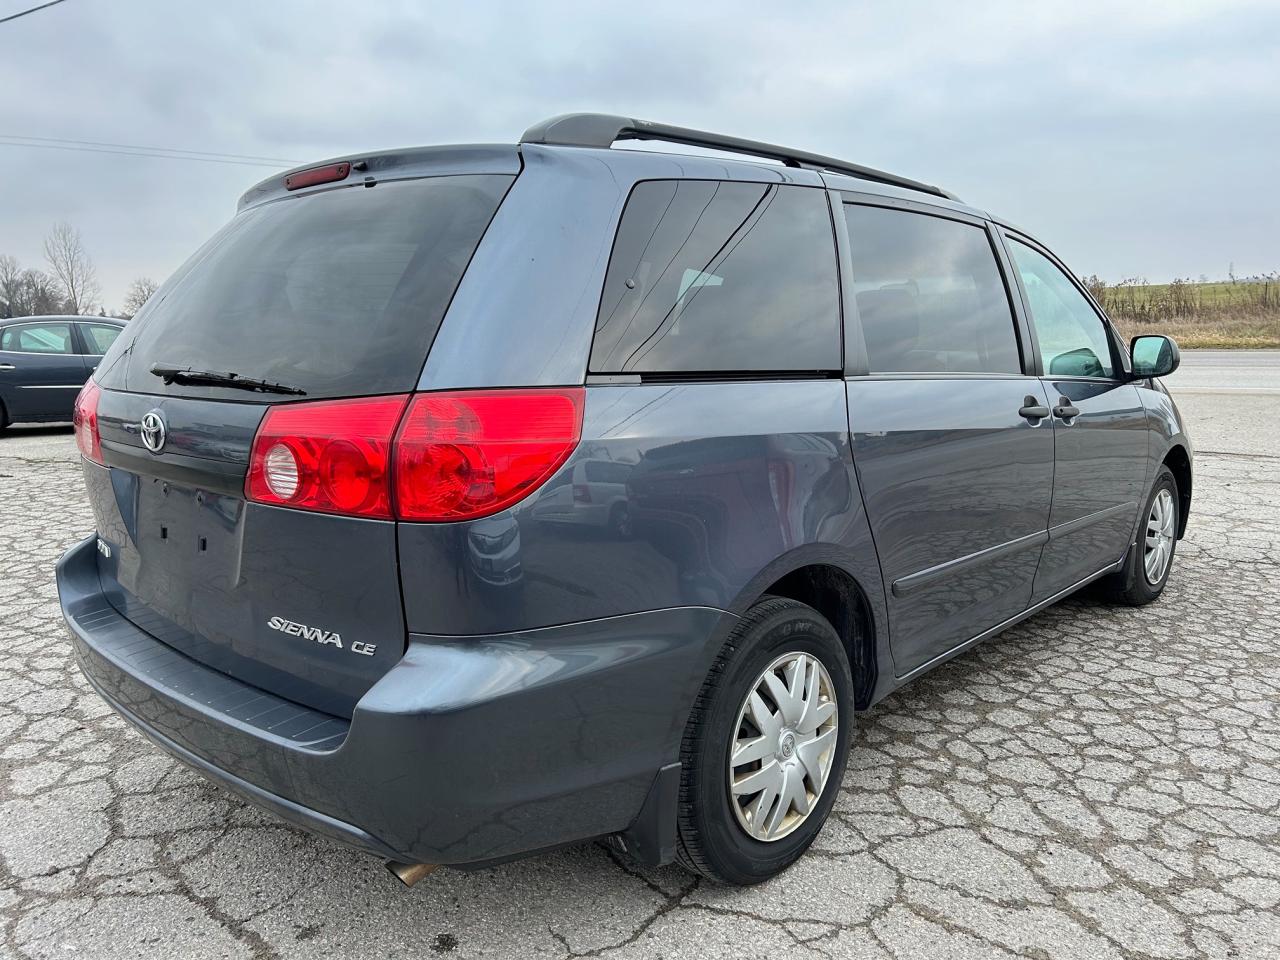 2009 Toyota Sienna CE*7 PASS*219 KMS*NO ACCIDENTS*CLEAN CARFAX*CERT* - Photo #5